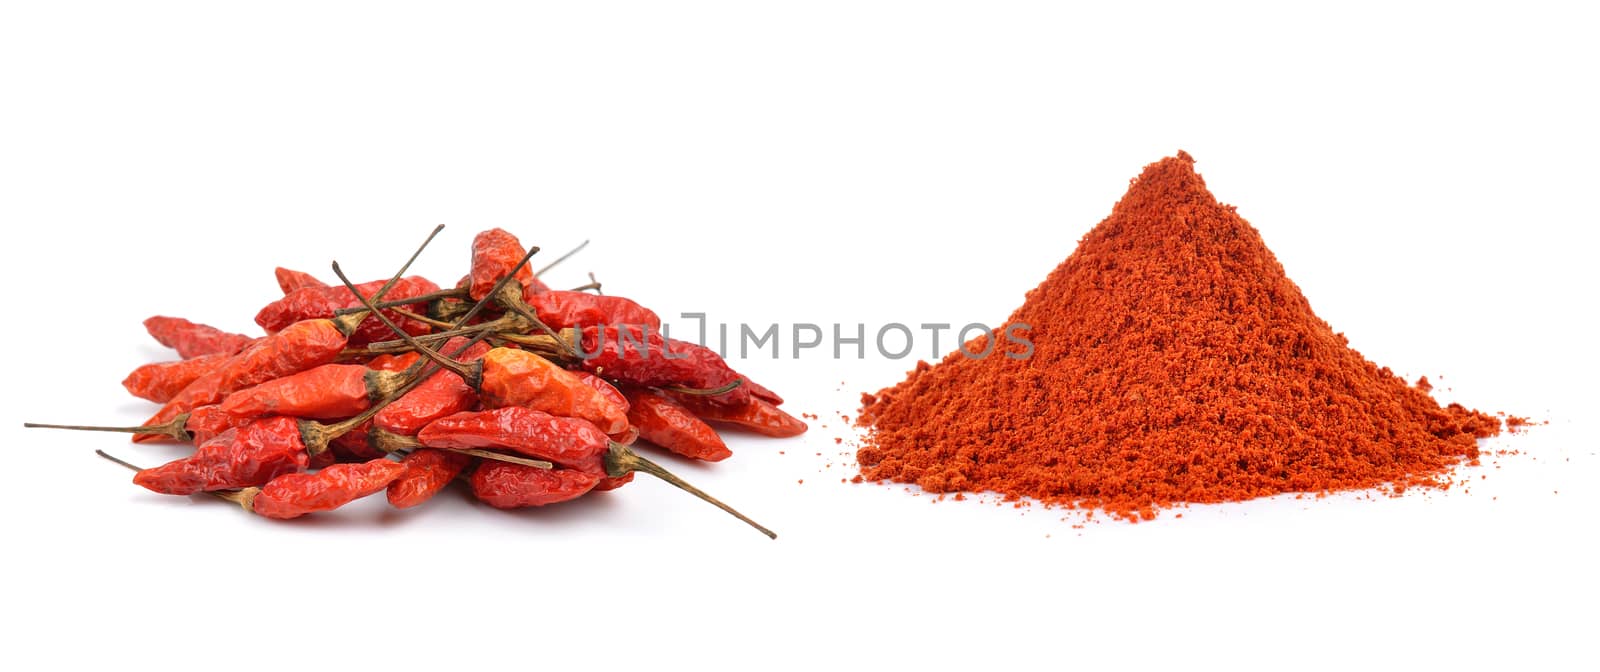 Powdered dried red pepper on white background